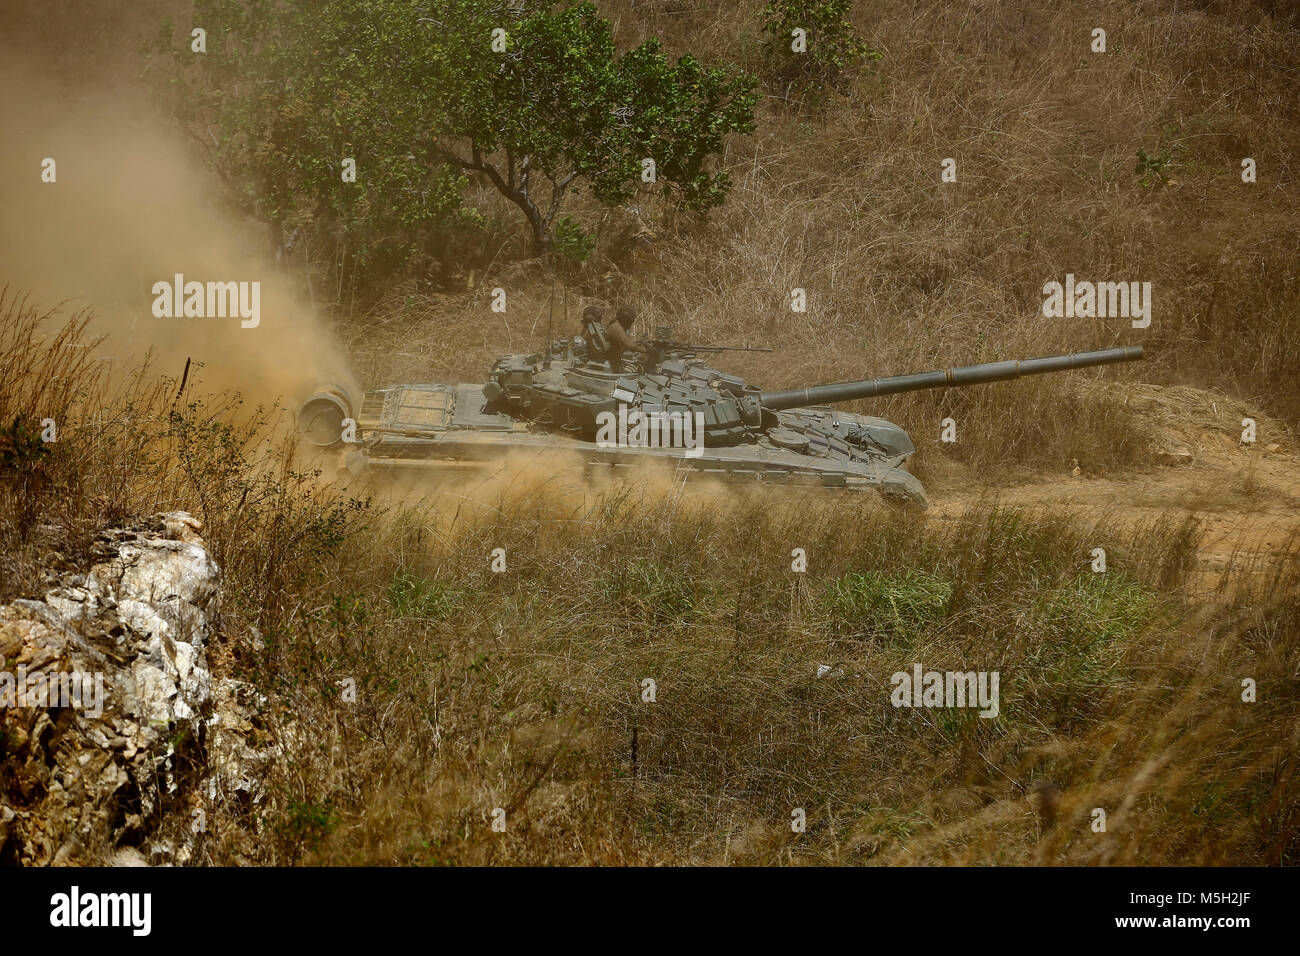 Naguanagua, Carabobo, Venezuela. 23rd Feb, 2018. February 23, 2018. Tanks of war models BMP3 and T72 conducted draw for cross-country obstacles, as part of the military exercises ''Soberania 2018'' ordered by President Nicolas Maduro. The war activity took place at the headquarters of the 41 Armored Brigade, located in Naguanagua, Carabobo state. Photo: Juan Carlos Hernandez Credit: Juan Carlos Hernandez/ZUMA Wire/Alamy Live News Stock Photo